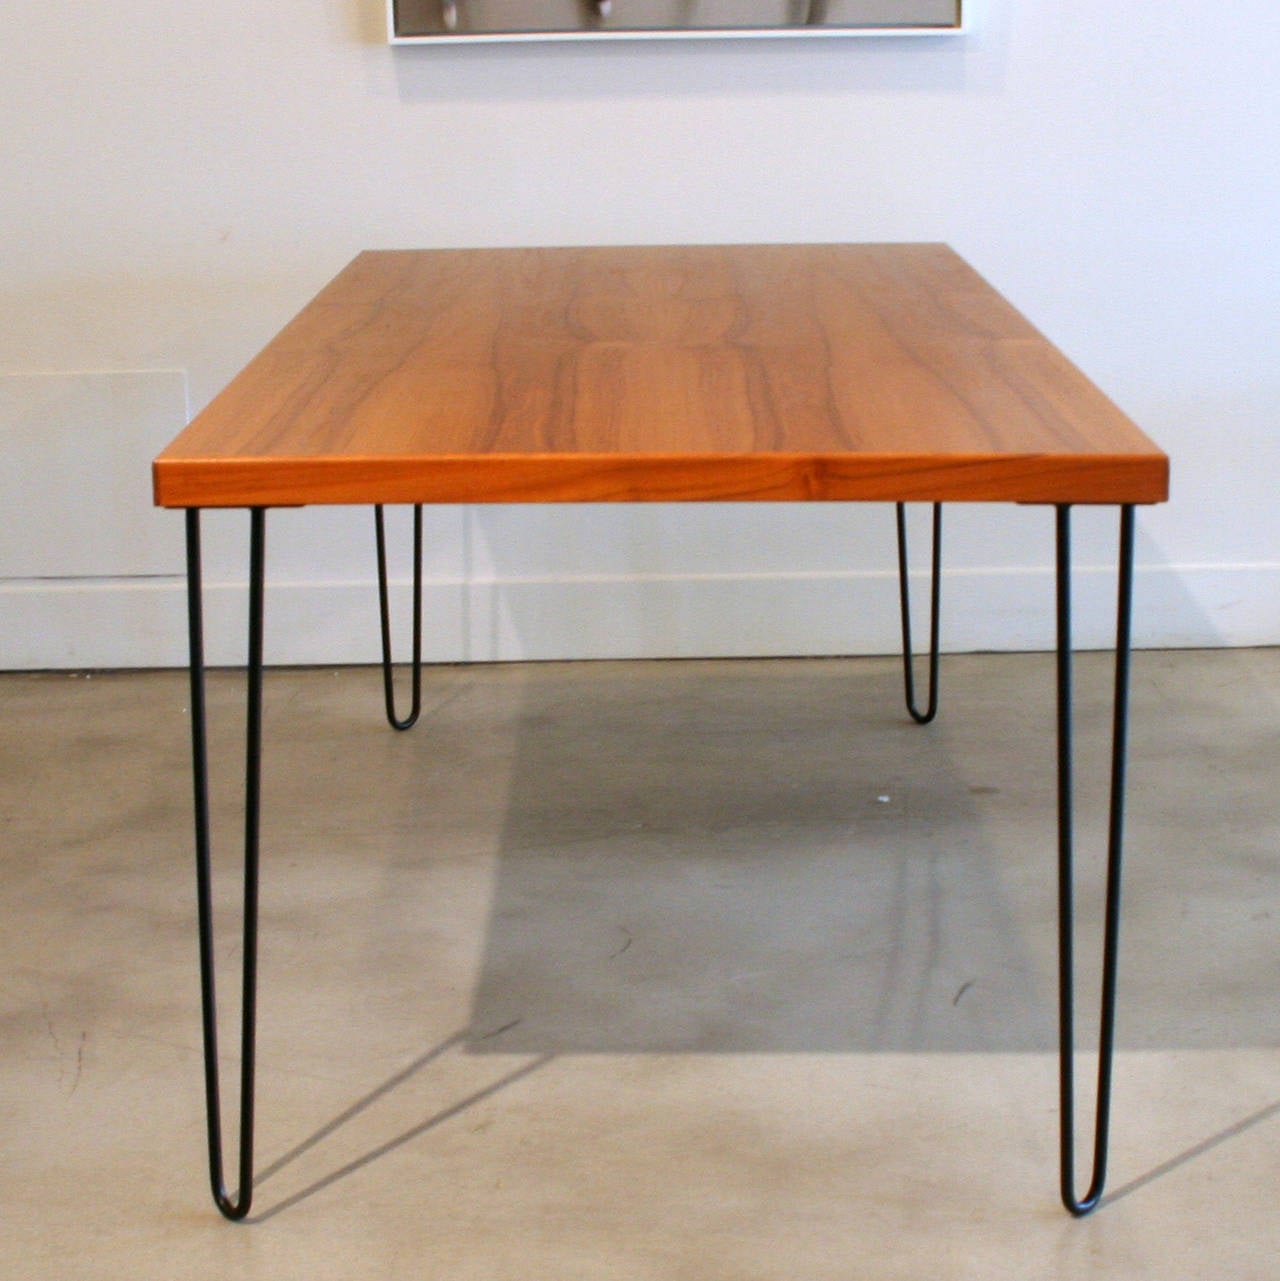 Vintage teak table top that has been reclaimed and refinished. New black metal hairpin legs have been added to create a contemporary feel. Two available.